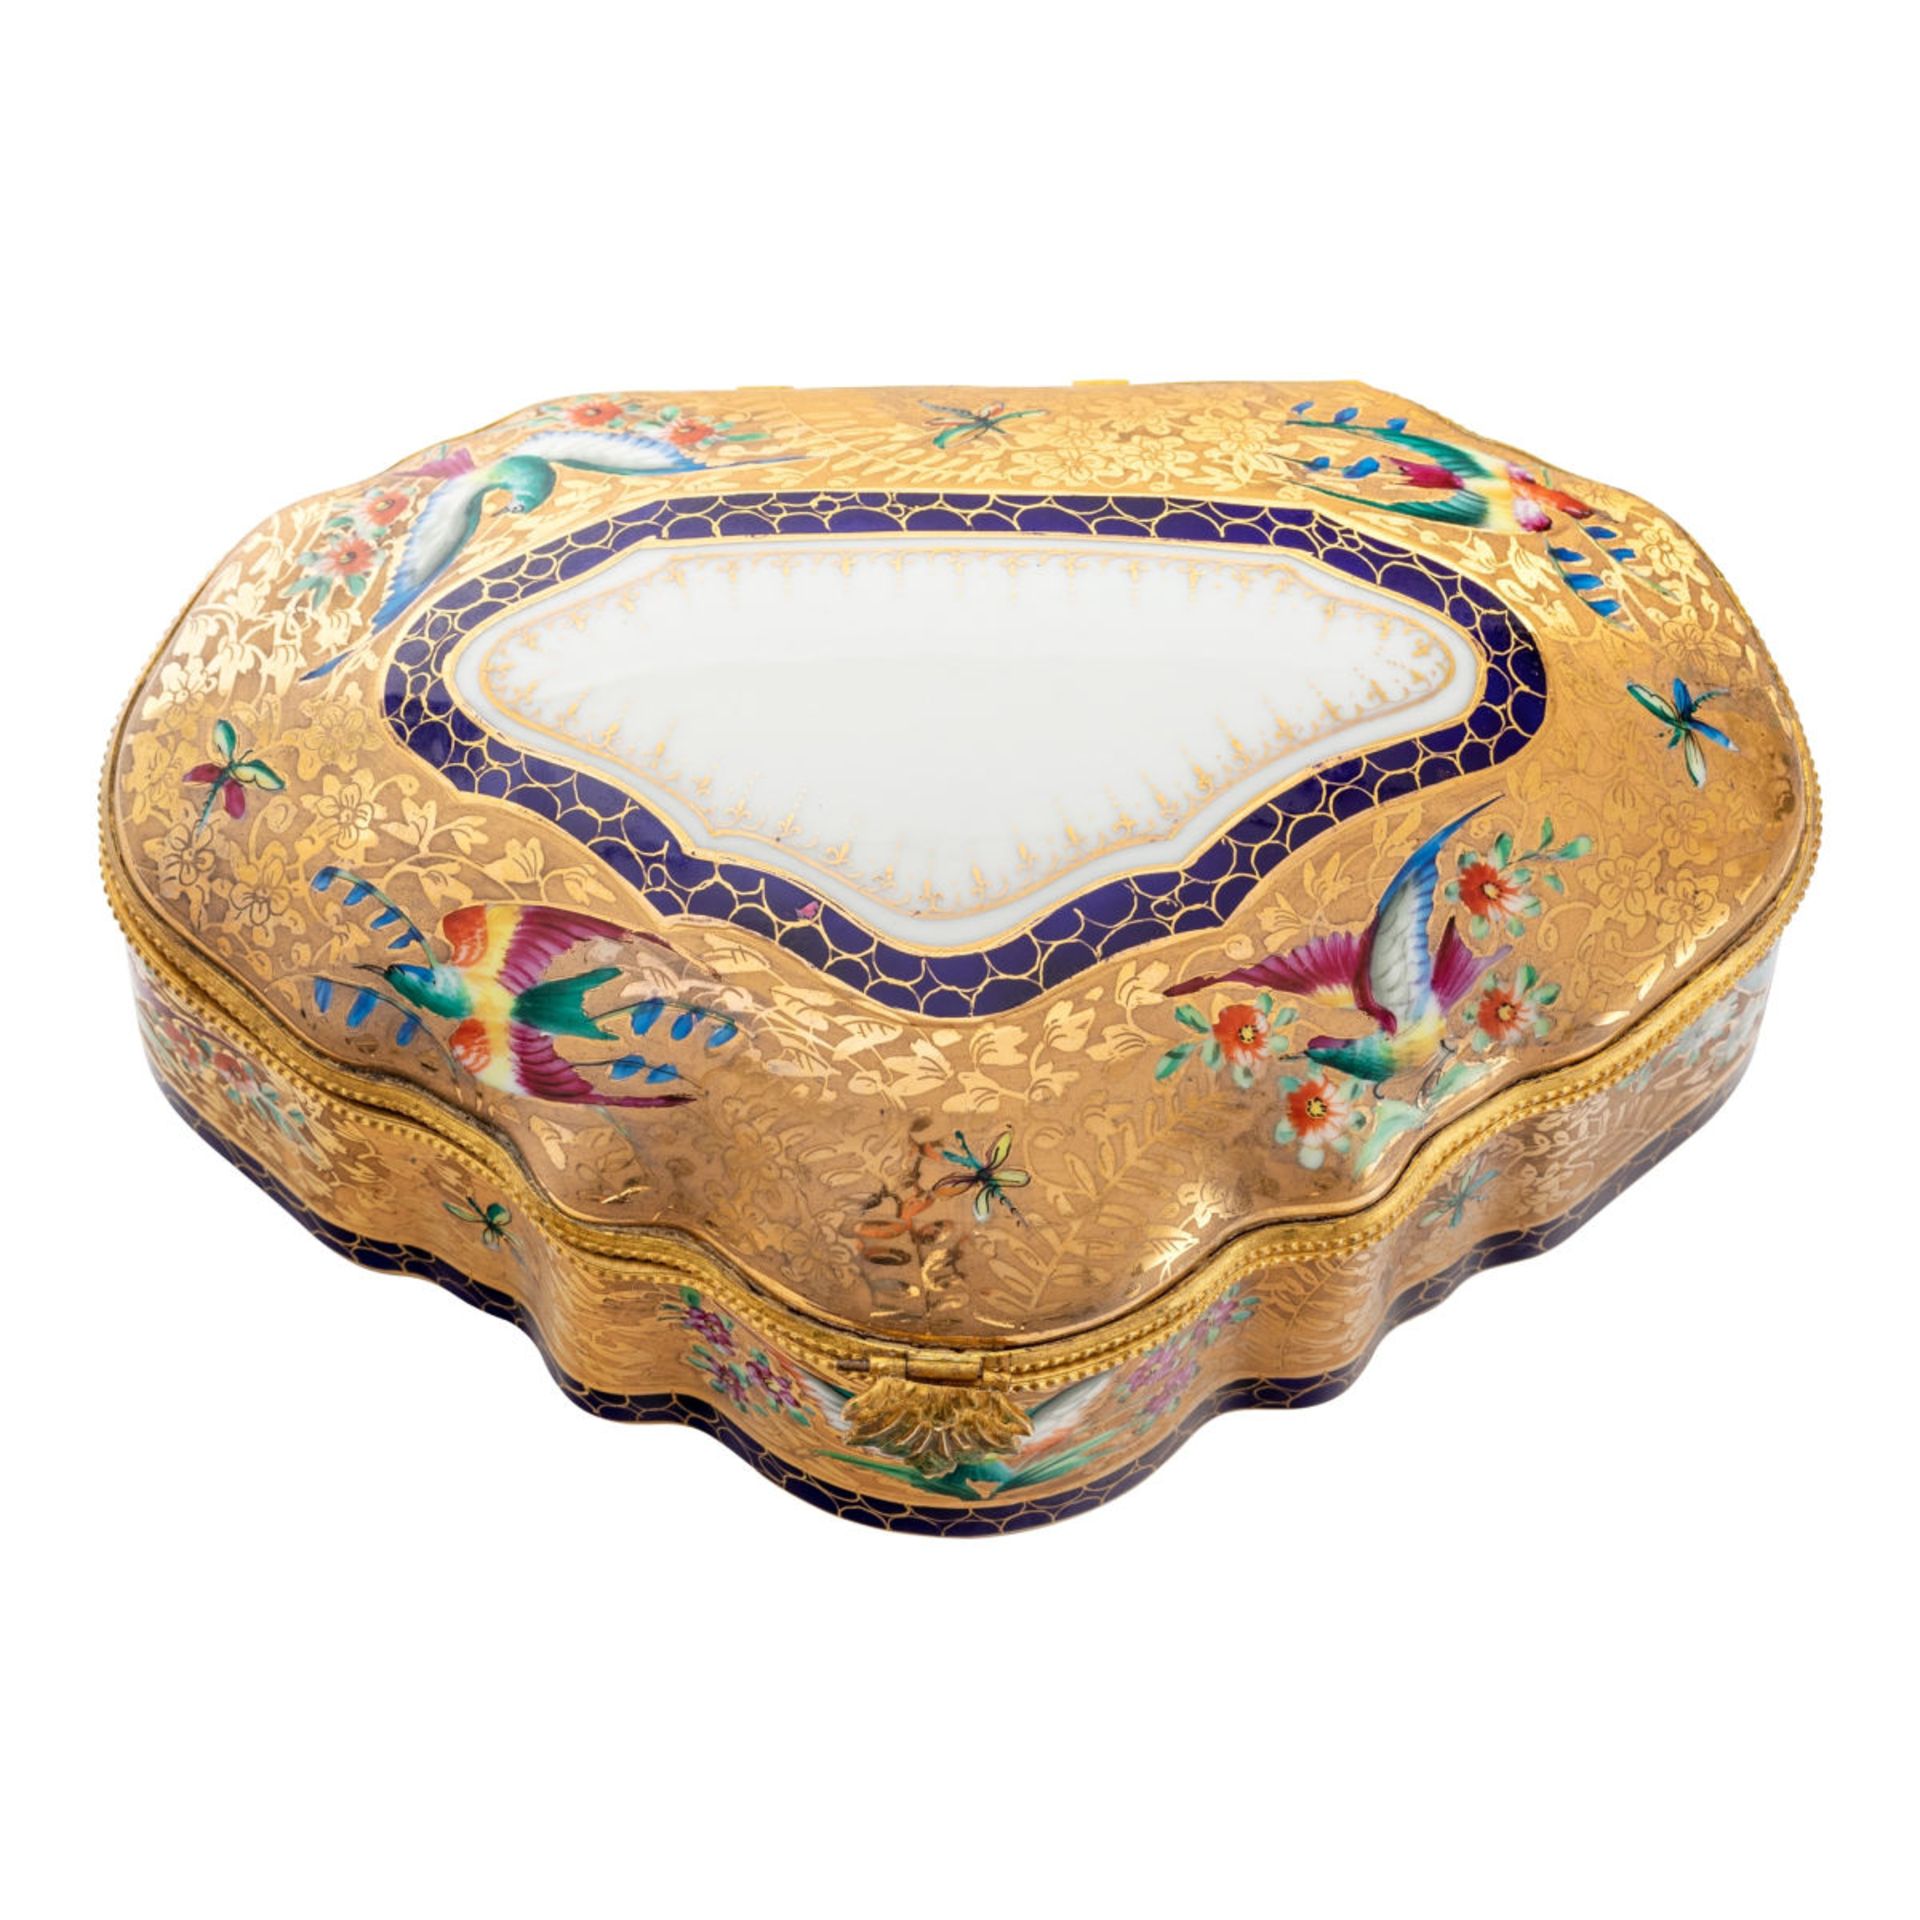 Lidded box with birds of paradise